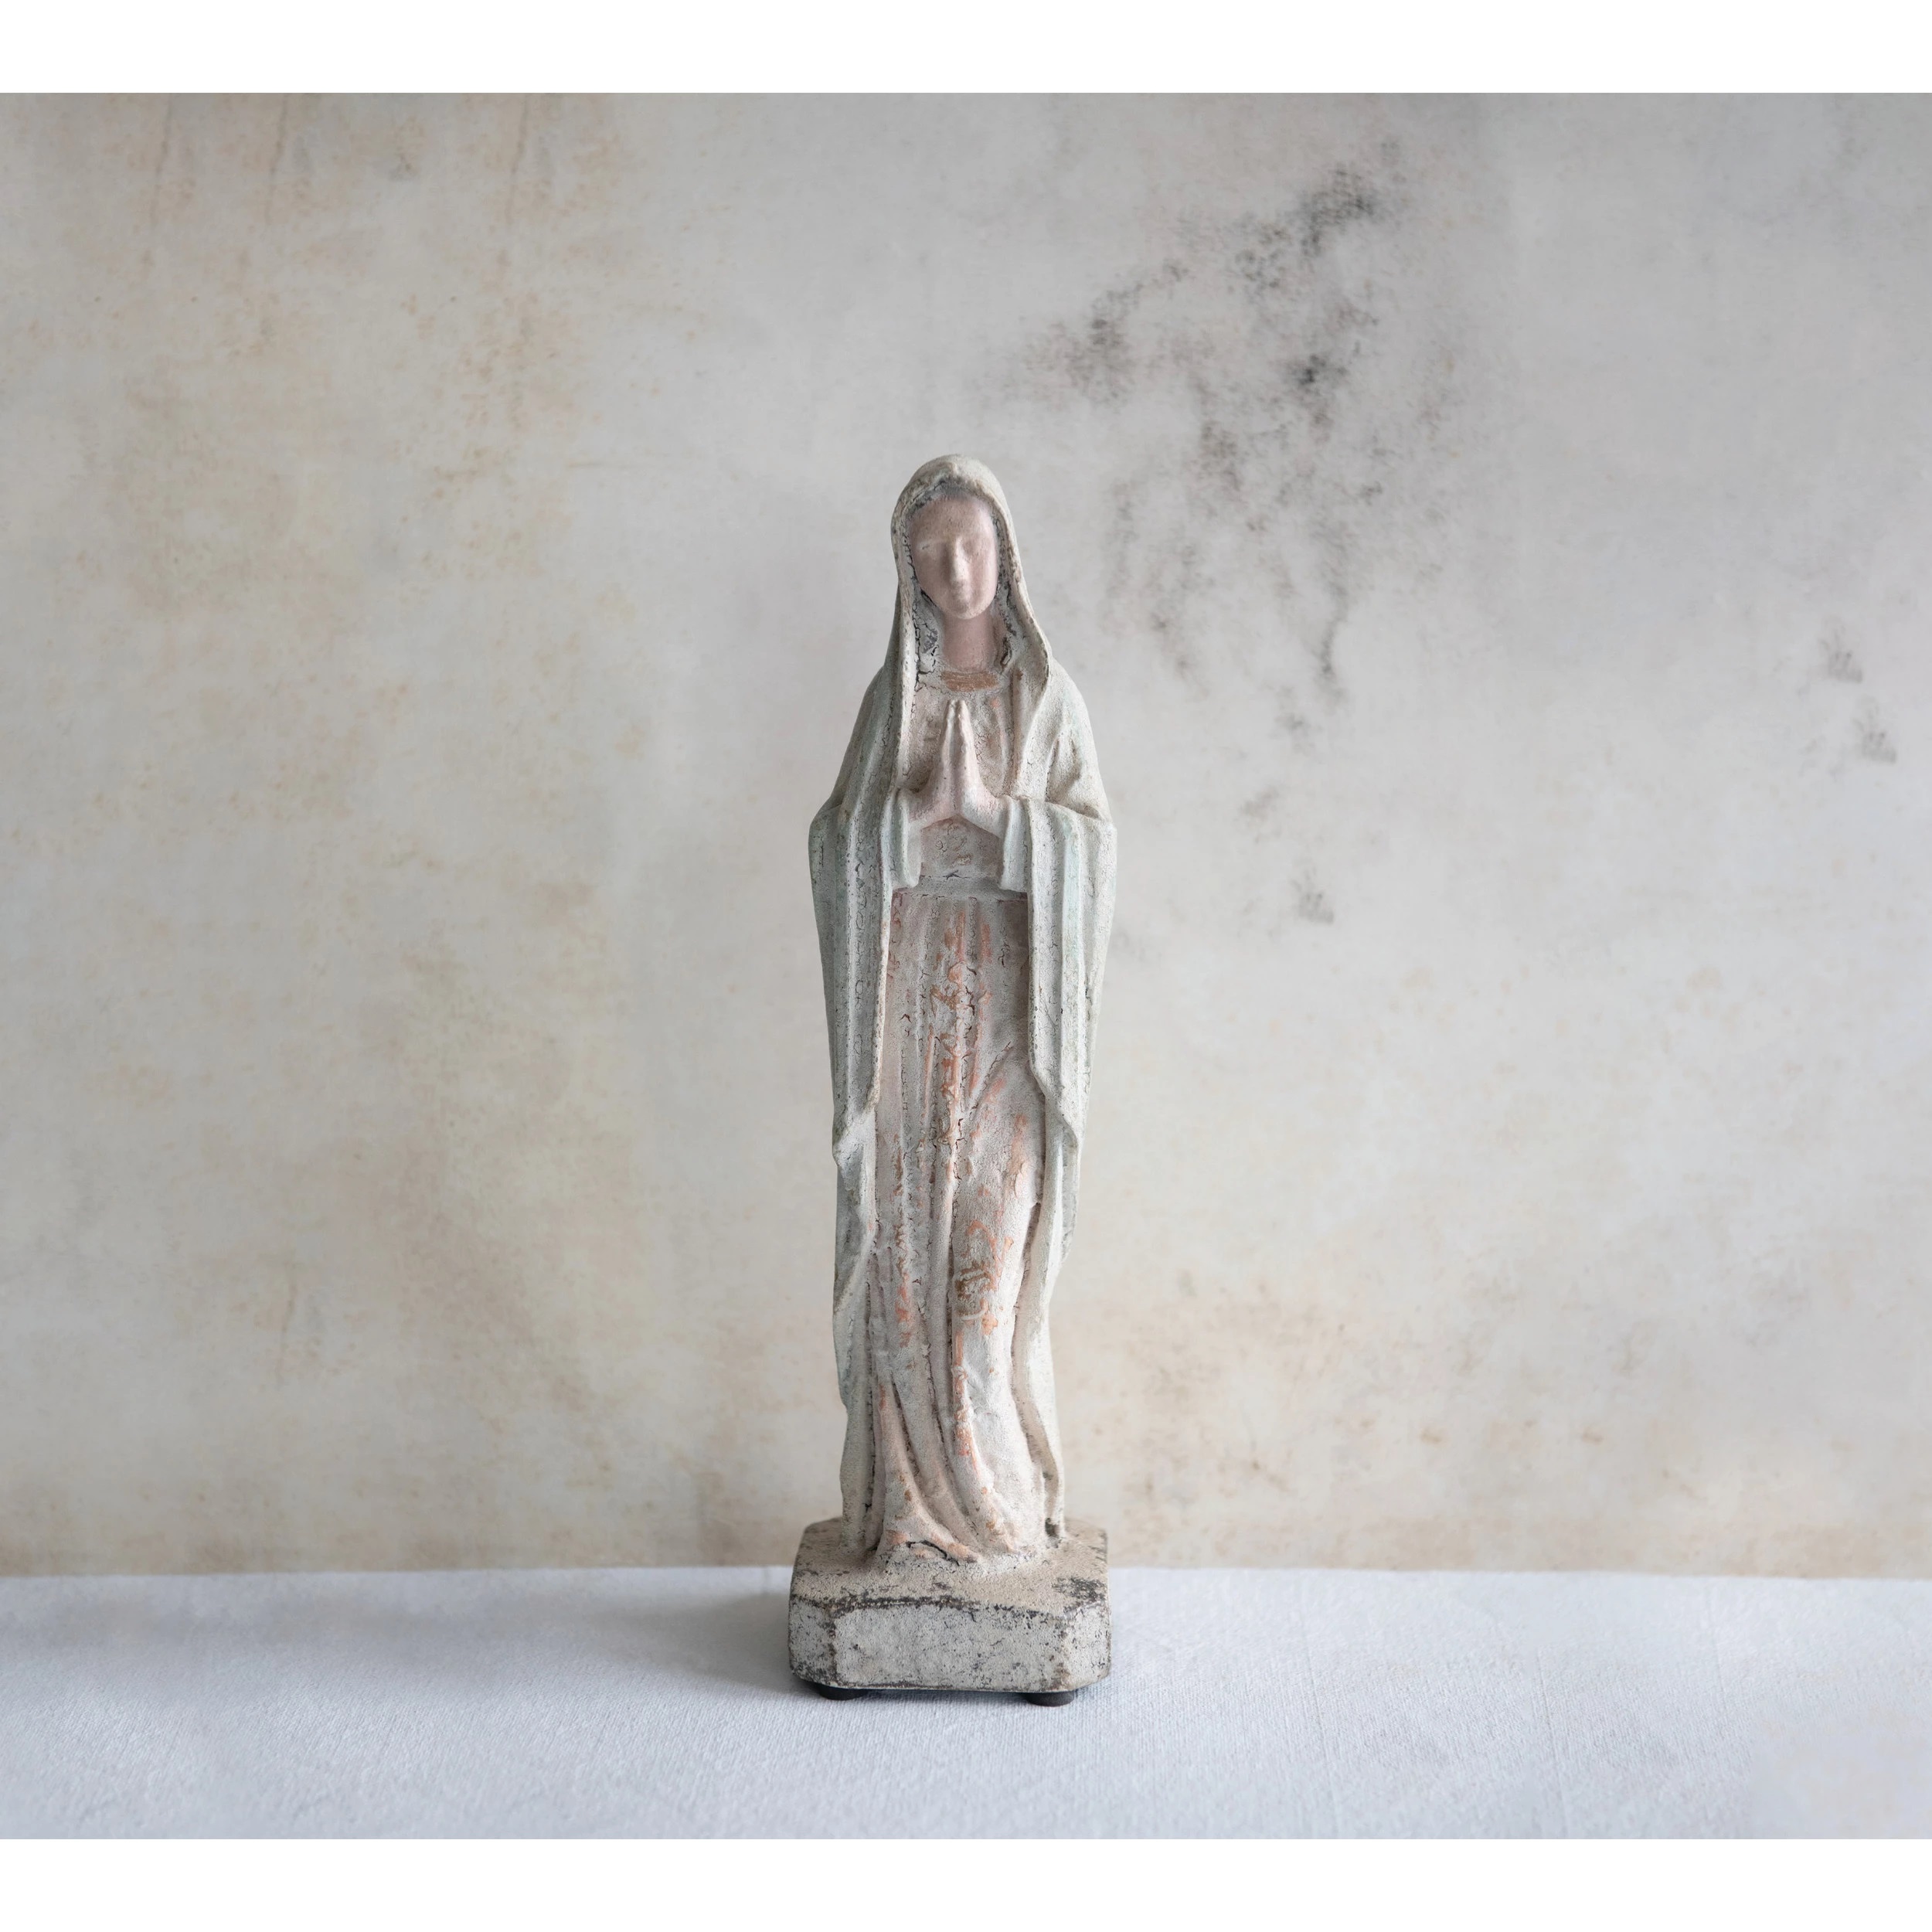 Magnesia Vintage Reproduction Virgin Mary Statue